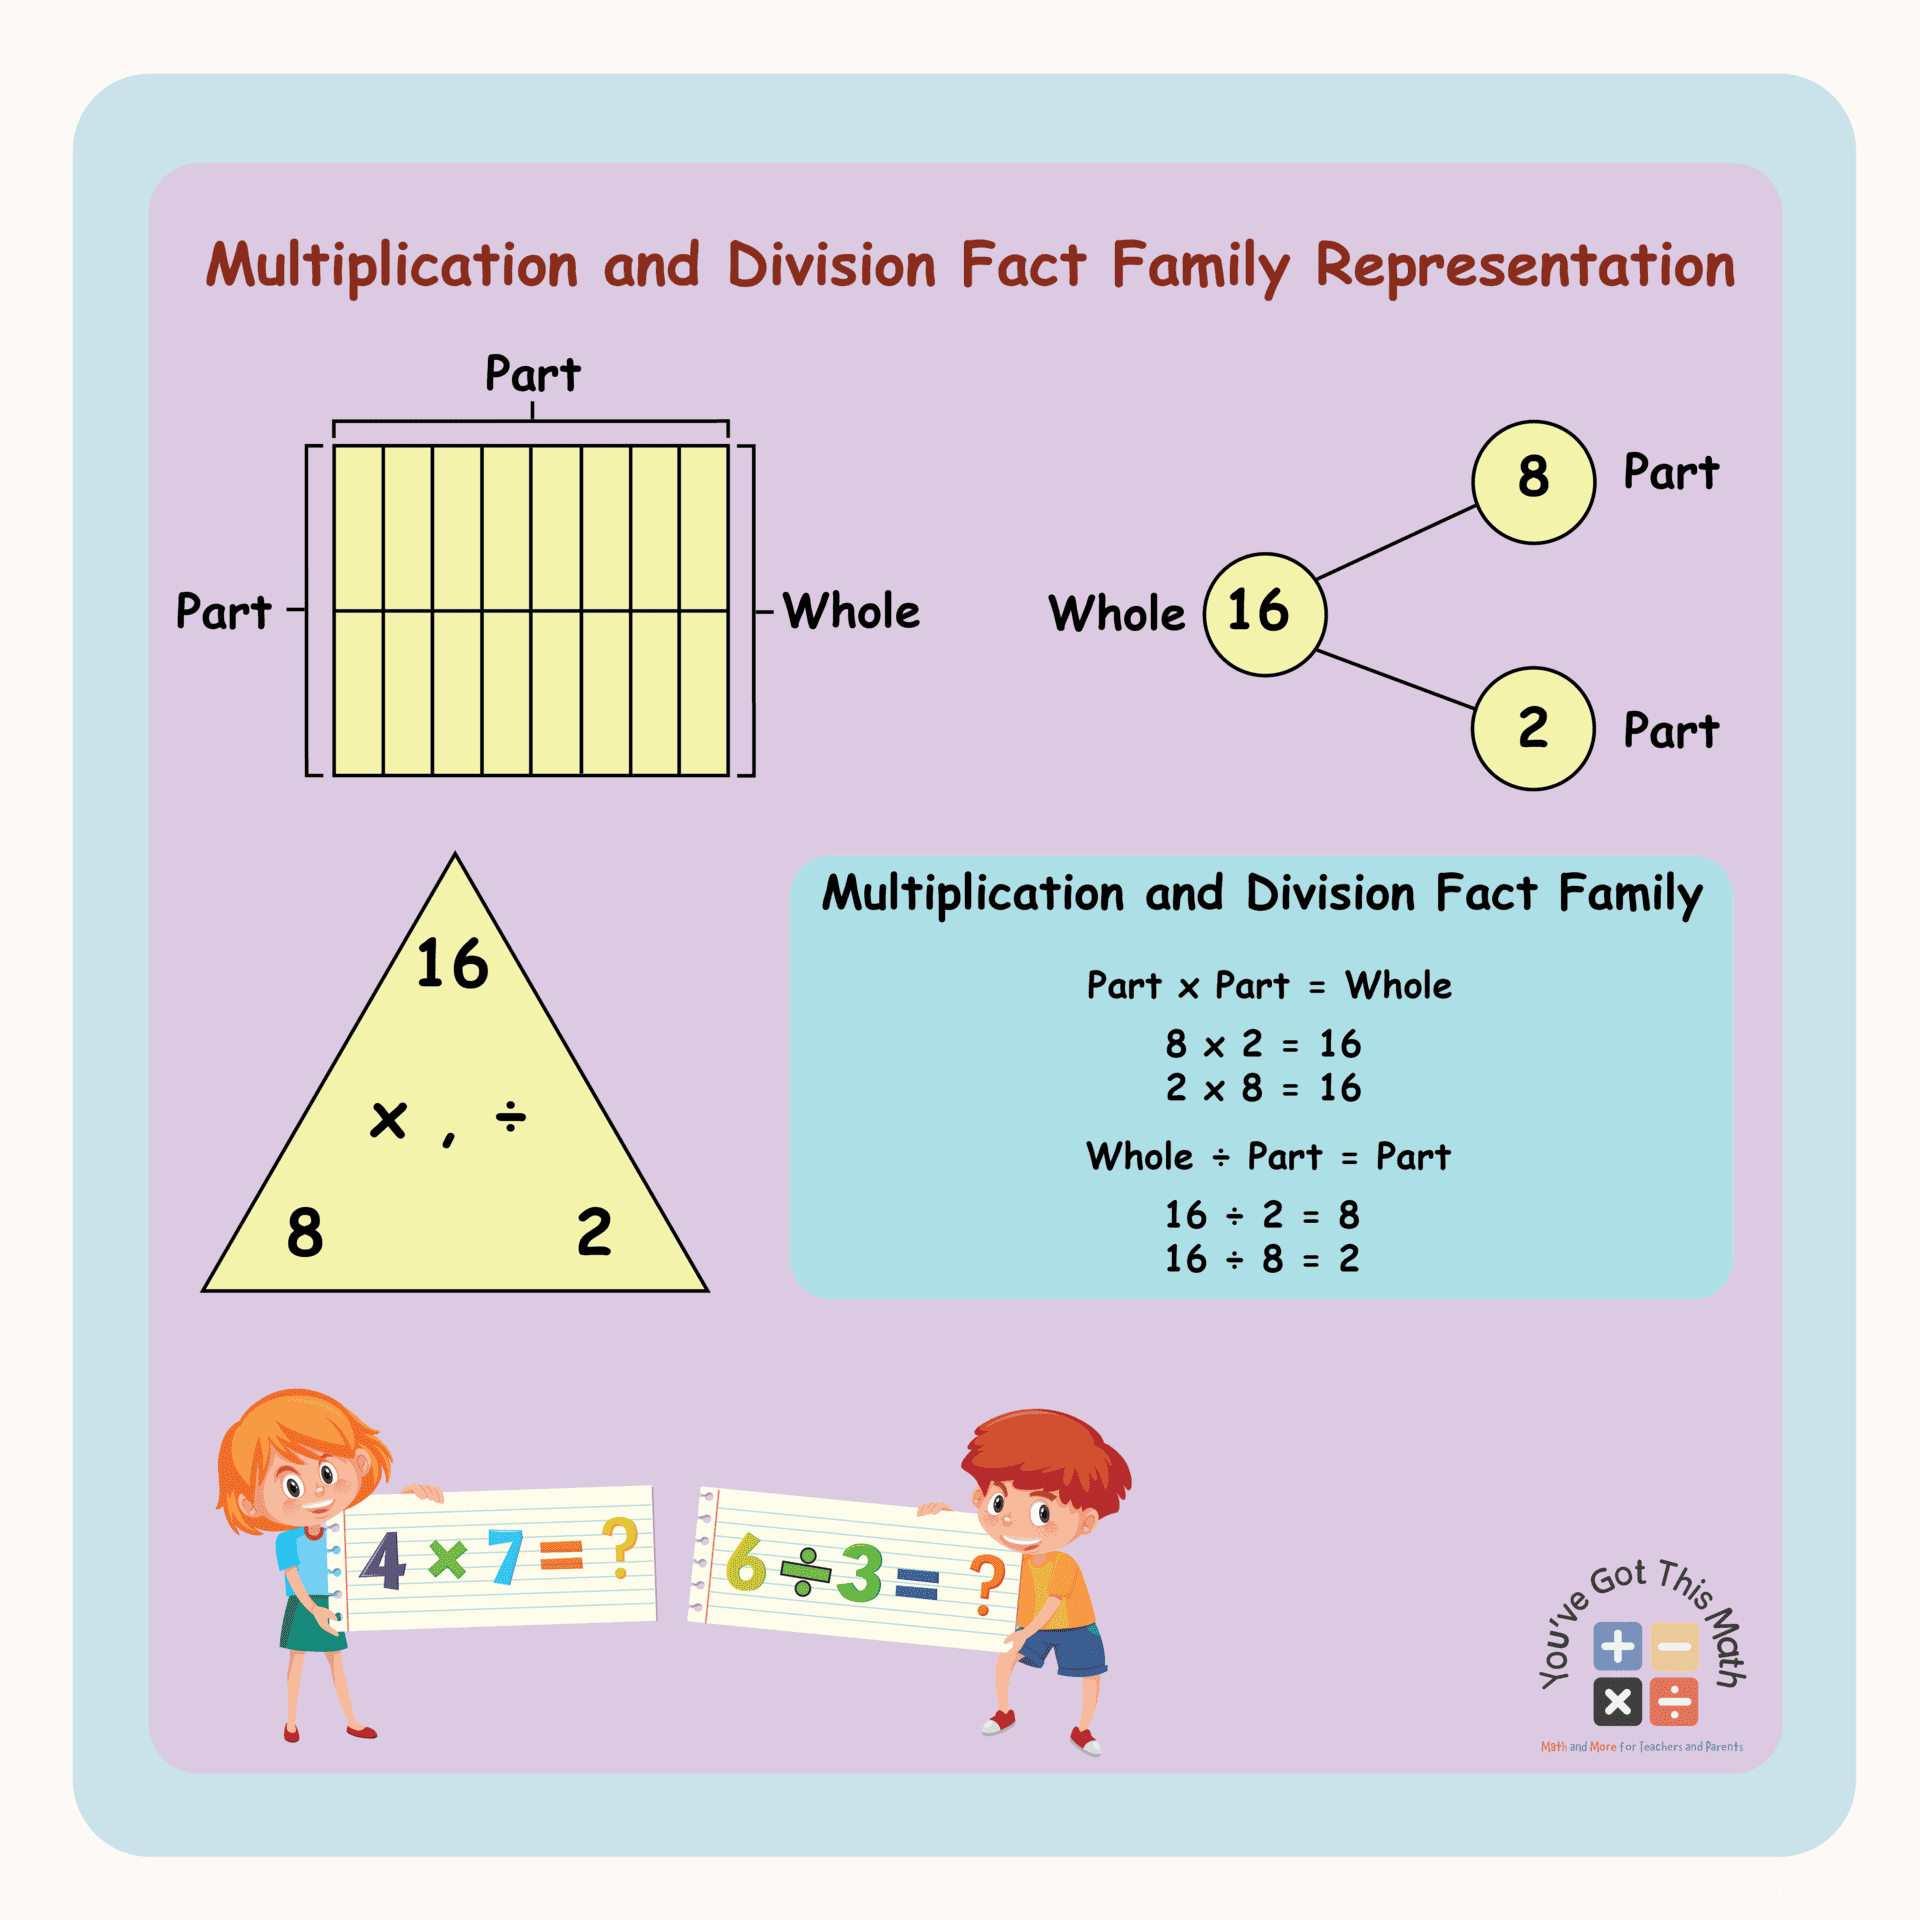 Representation of Multiplication and Division Fact Family